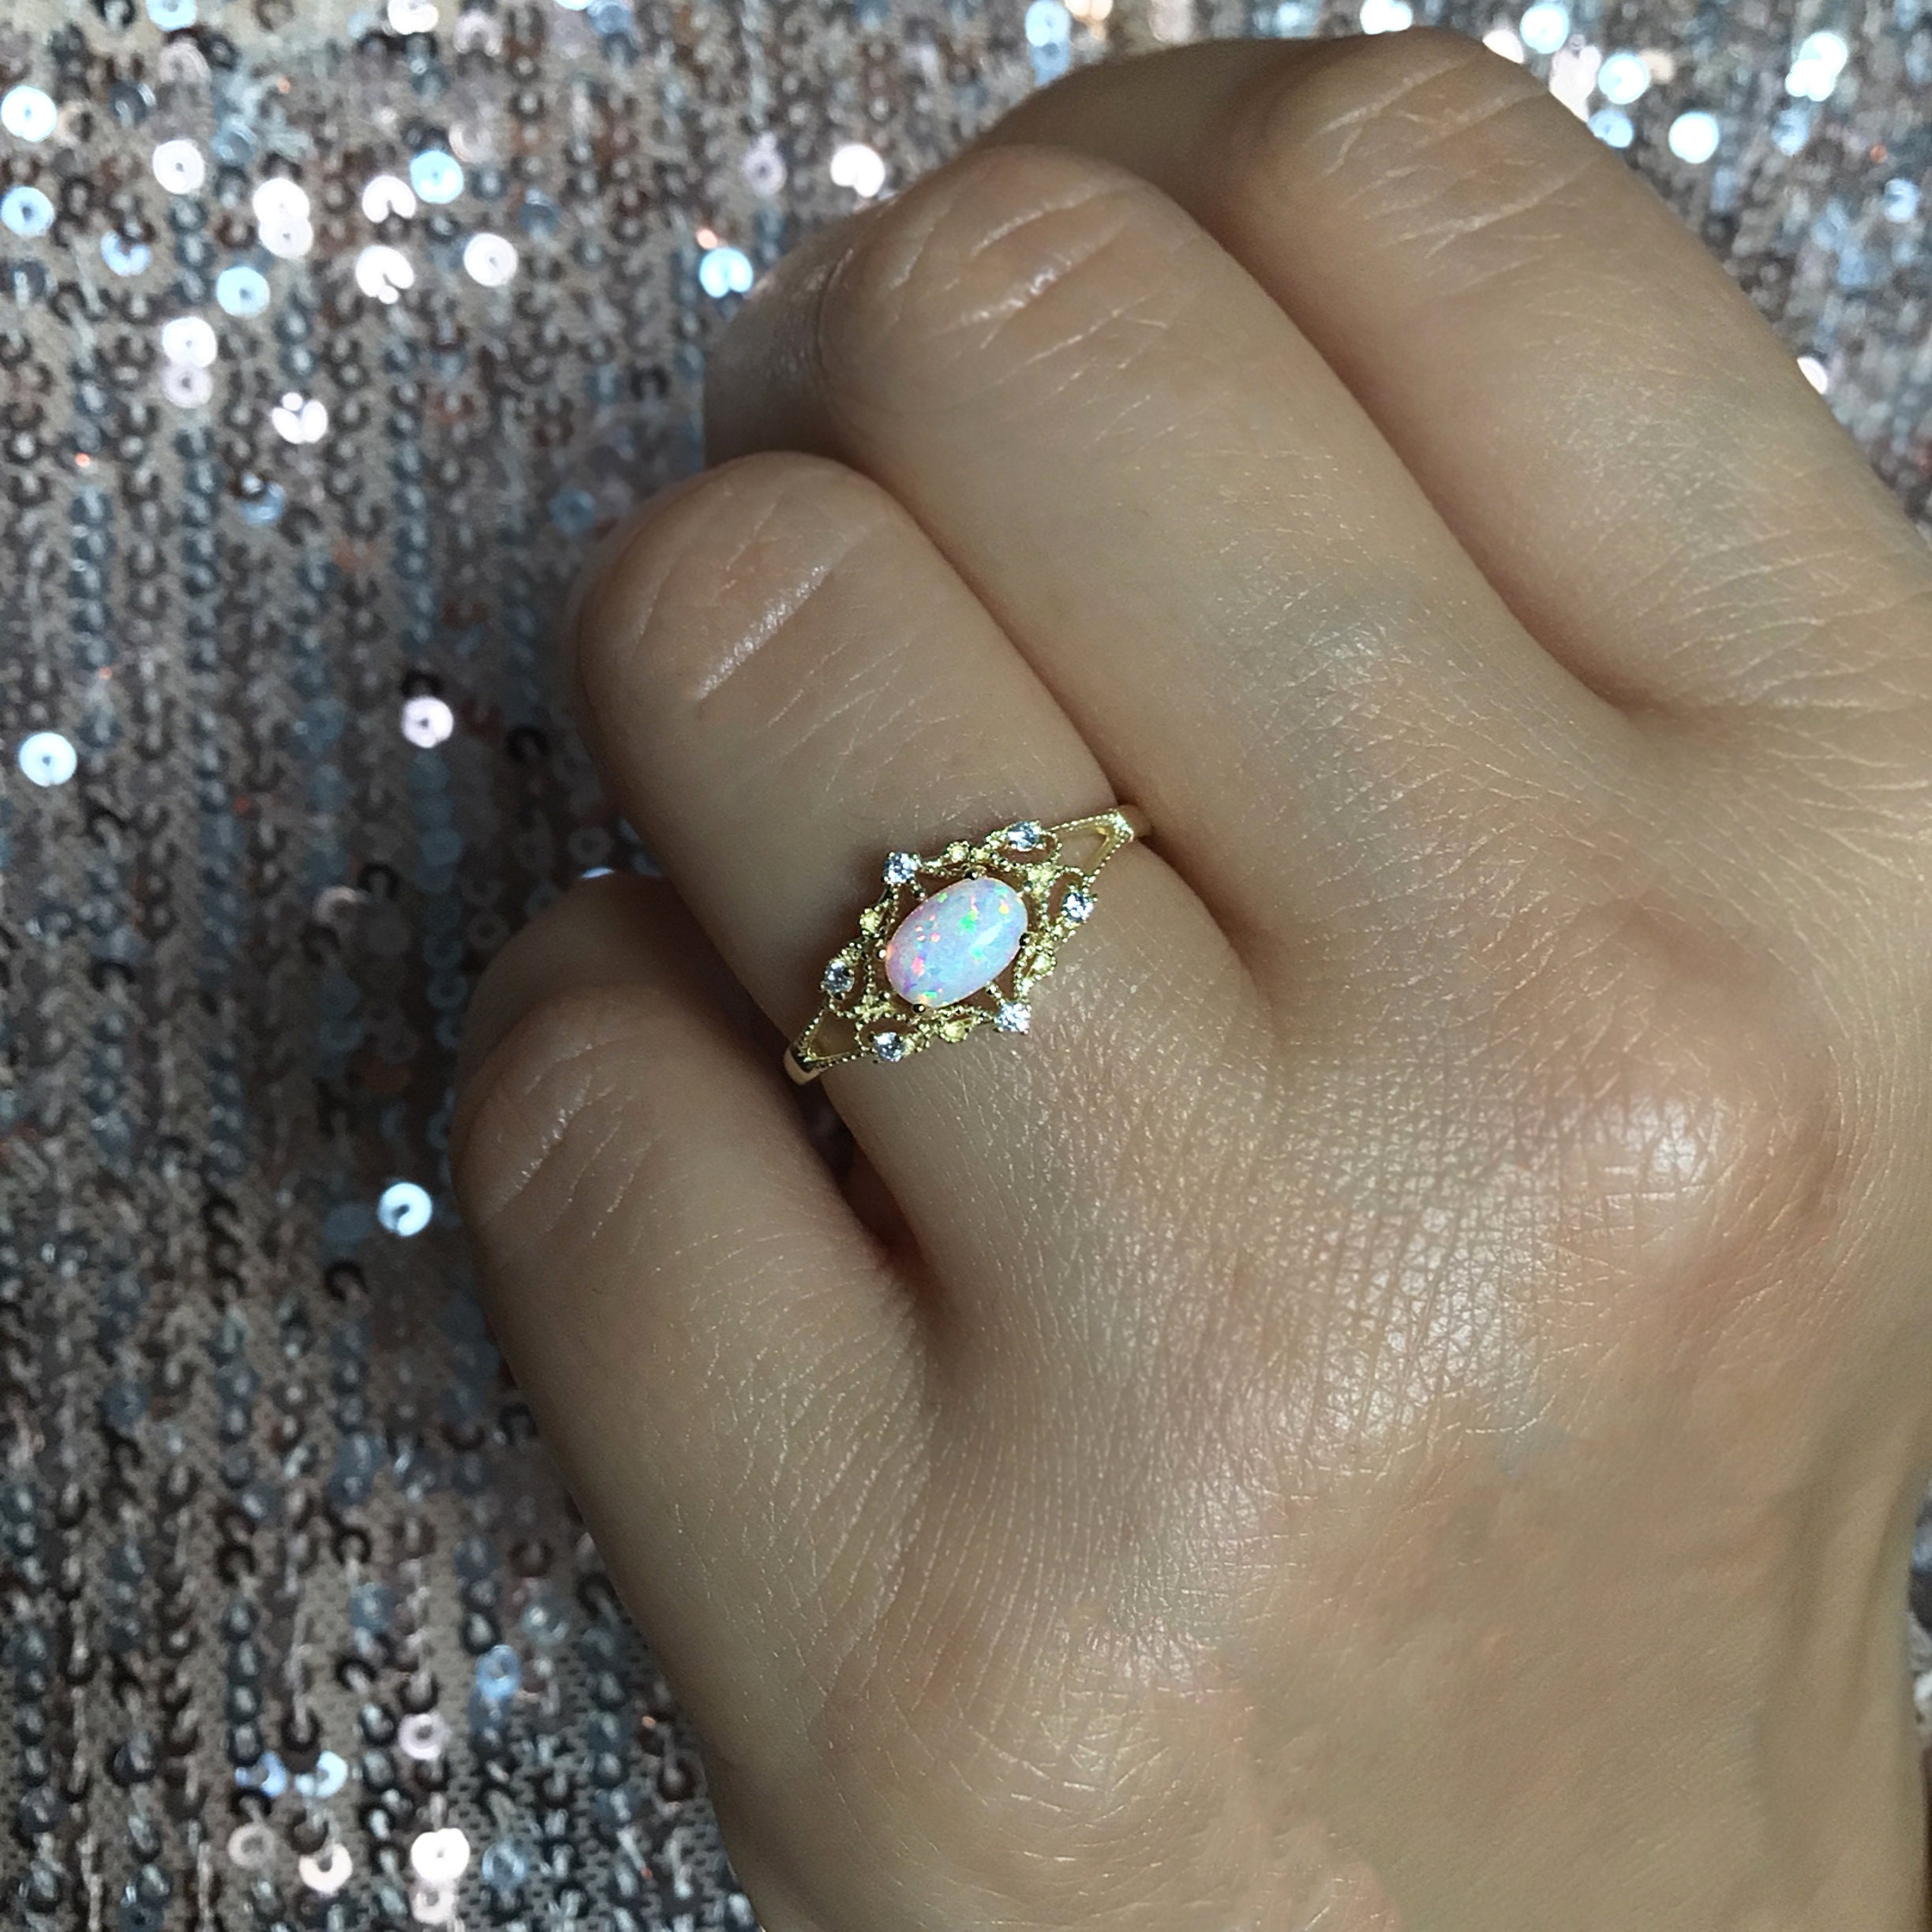 21 Best Rose Gold Opal Engagement Rings of 2023